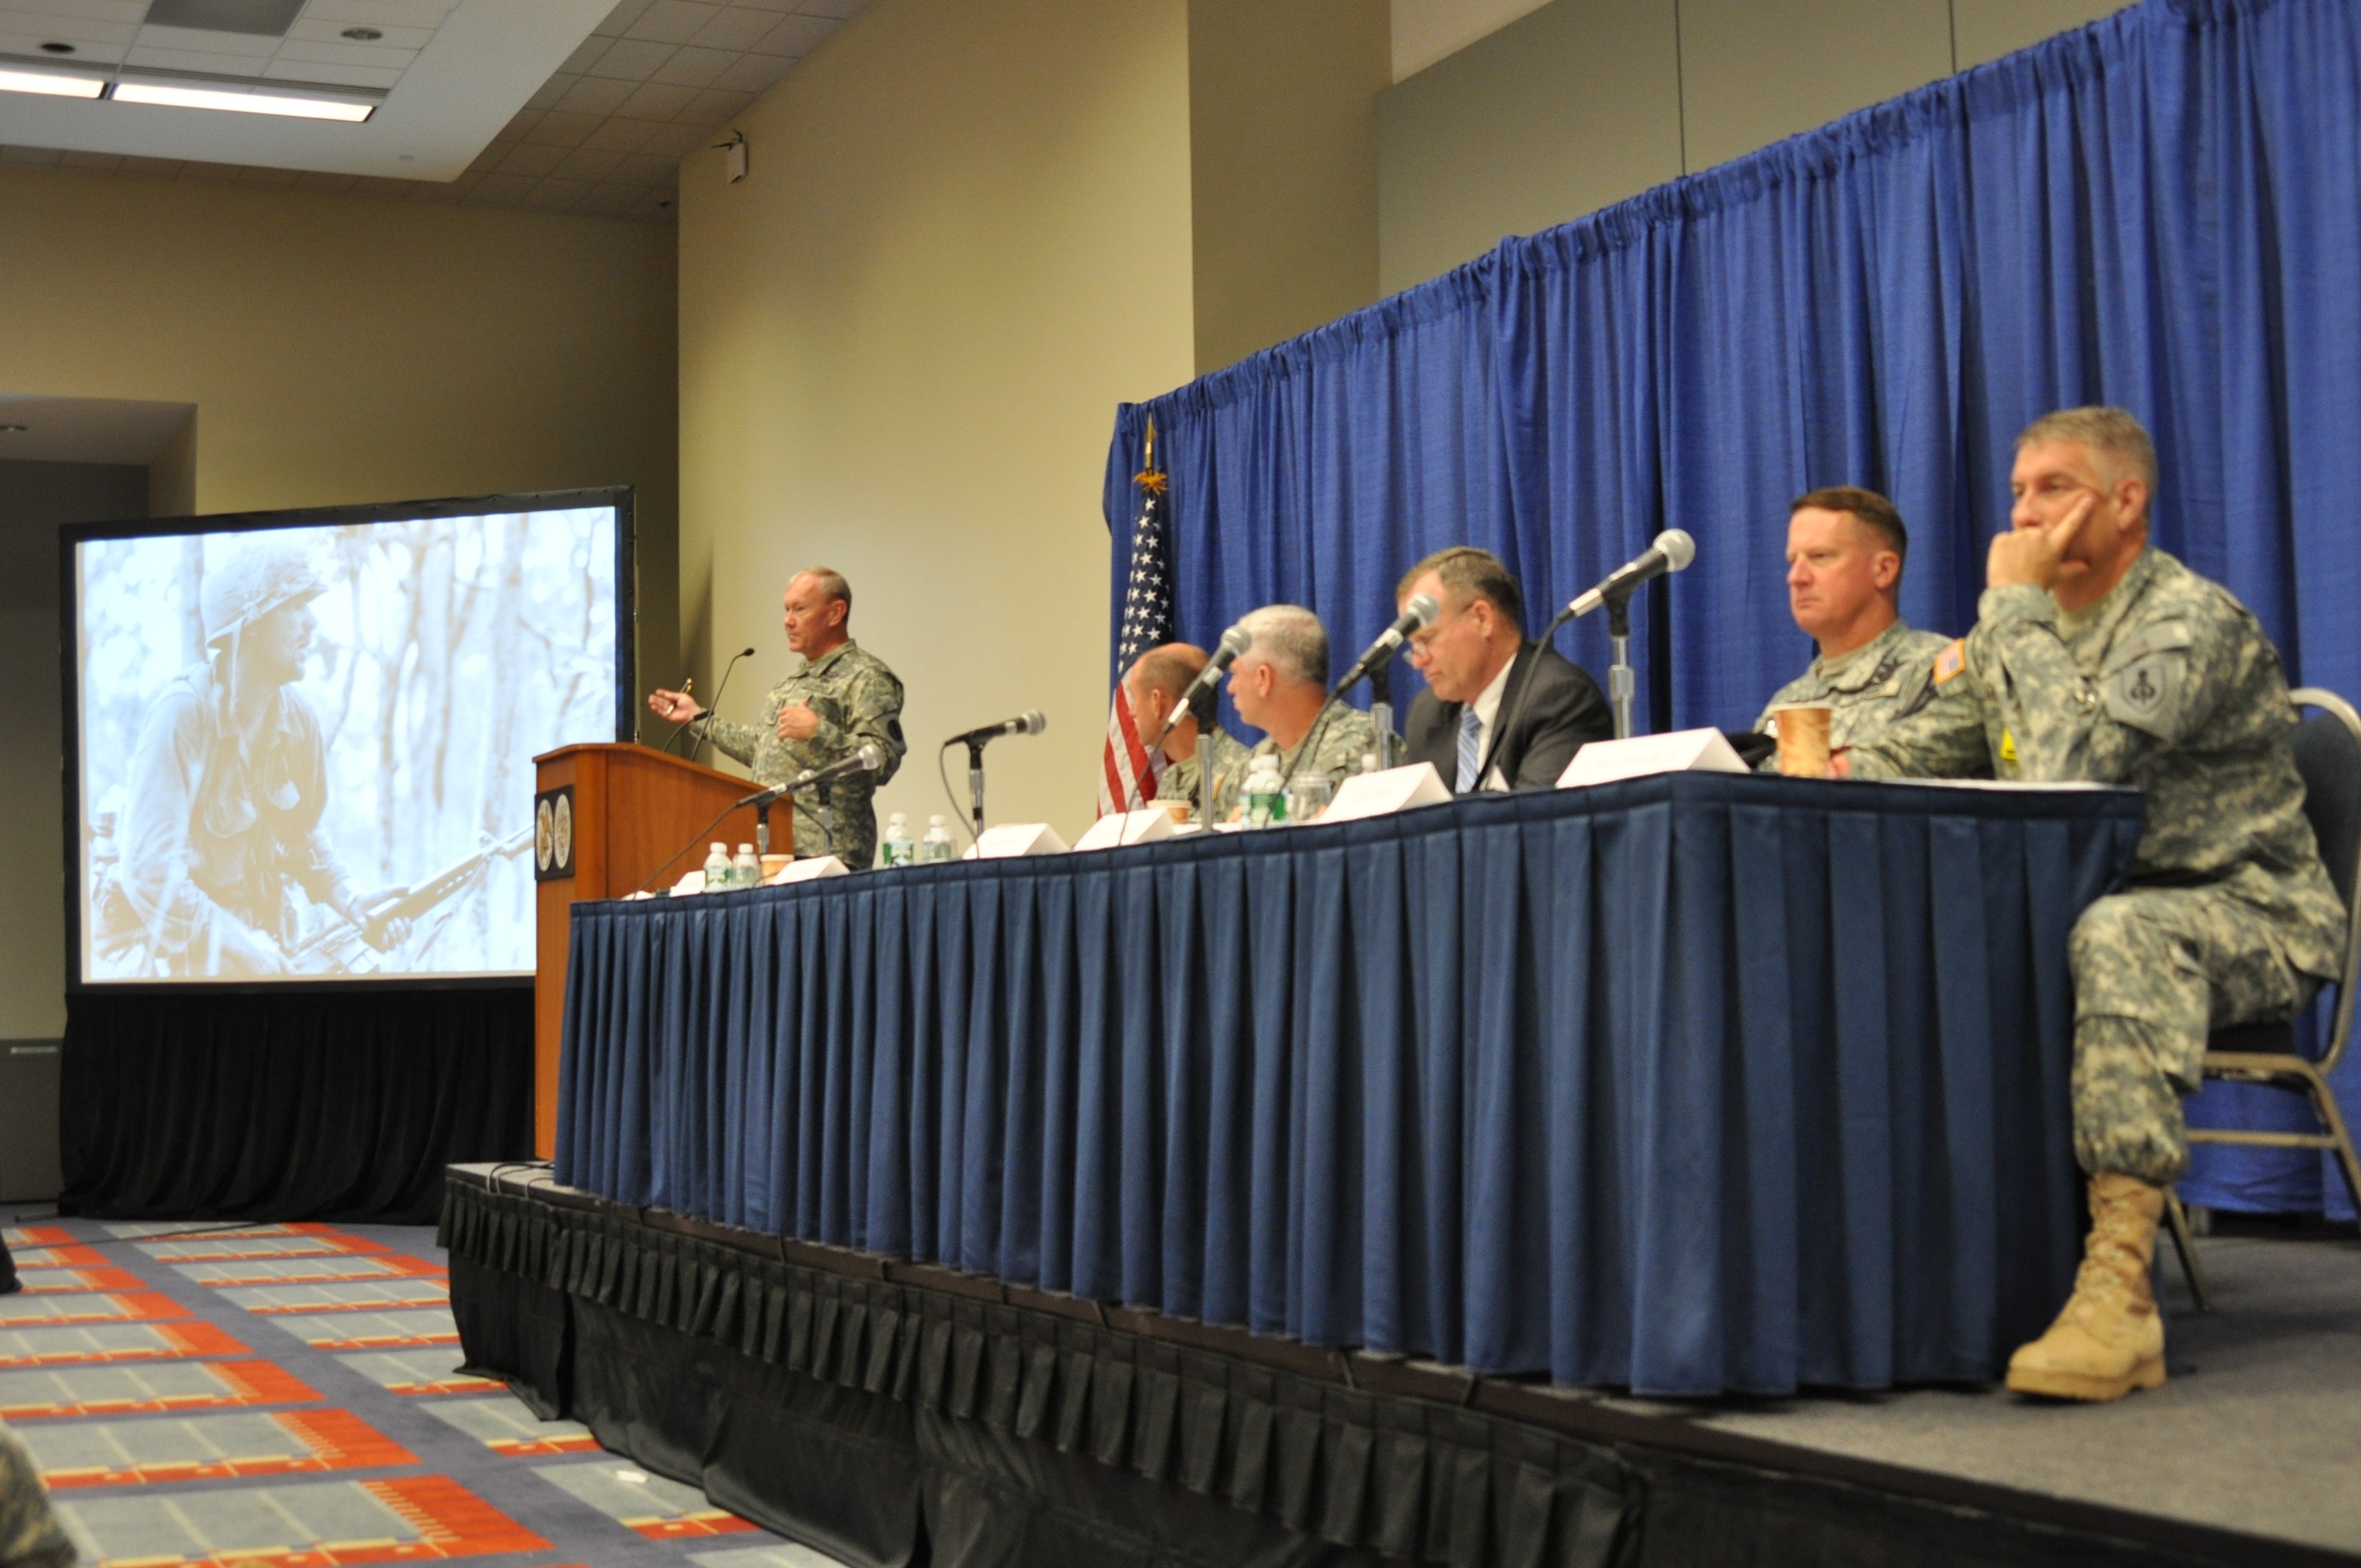 Army Leaders Discuss Leader Development At Ausa Article The United States Army 3914